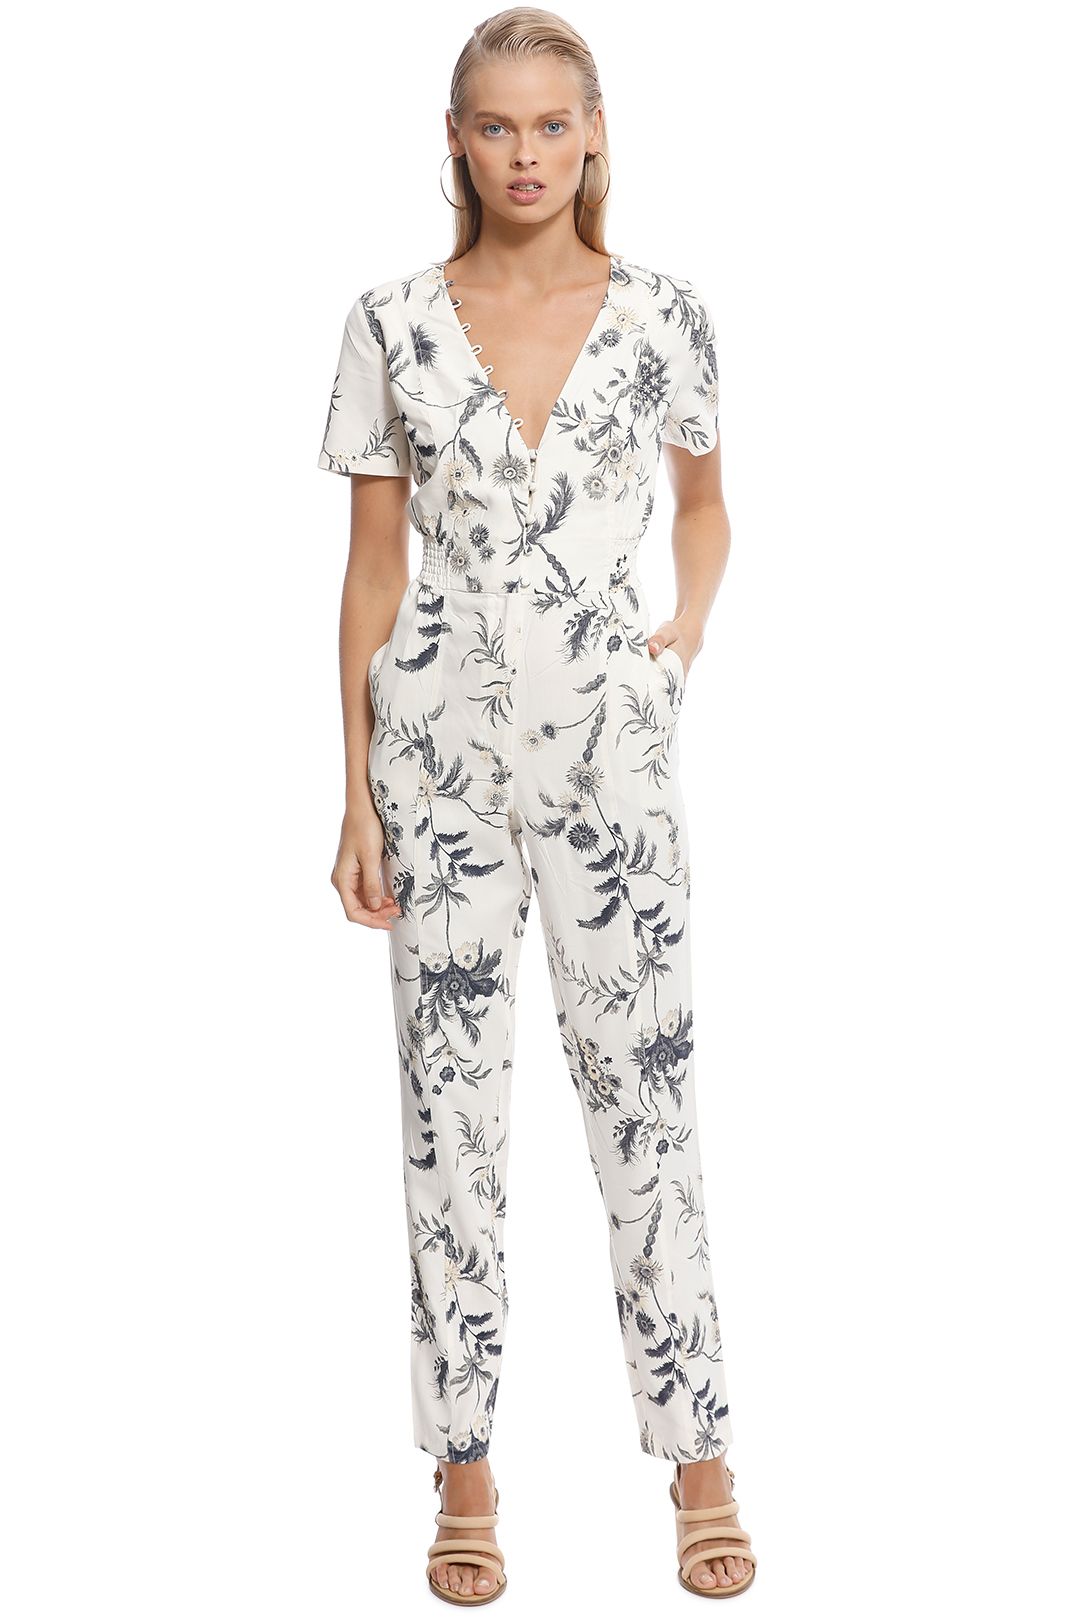 SIR The Label - Florentine Panelled Jumpsuit - Ivory - Front